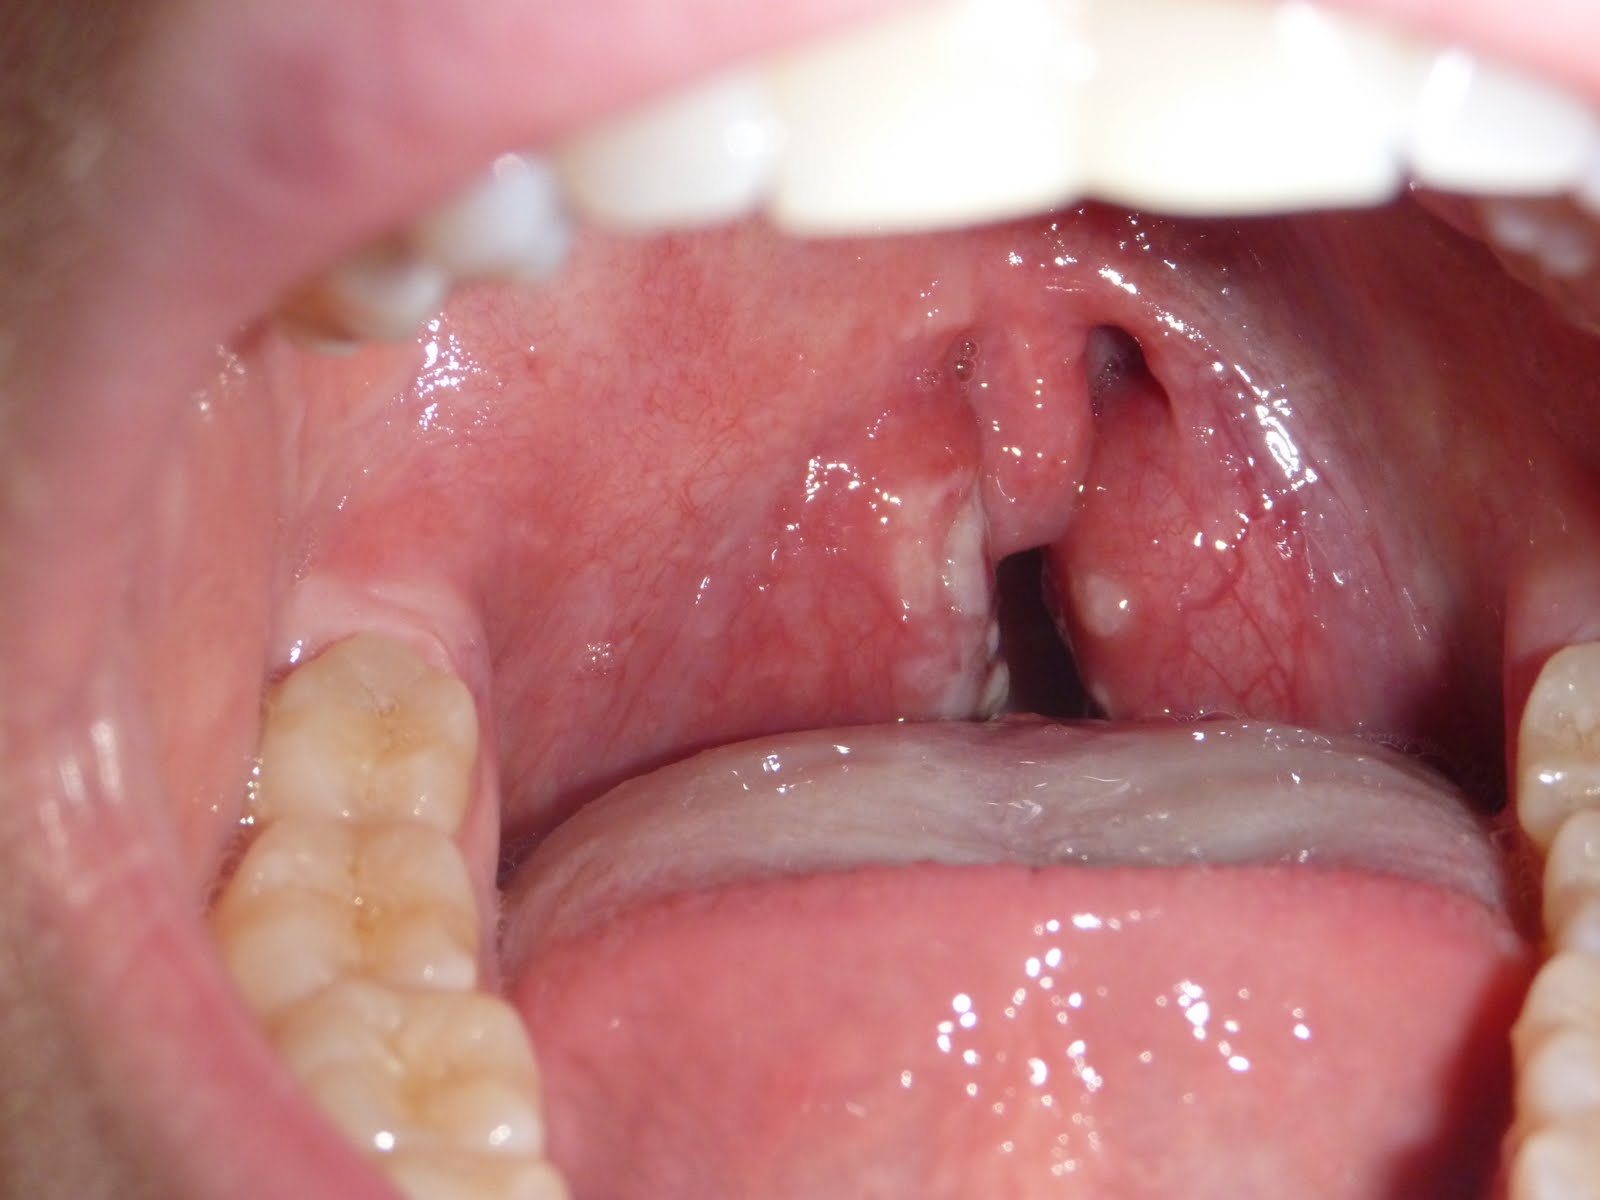 Strep throat in adult without spleen